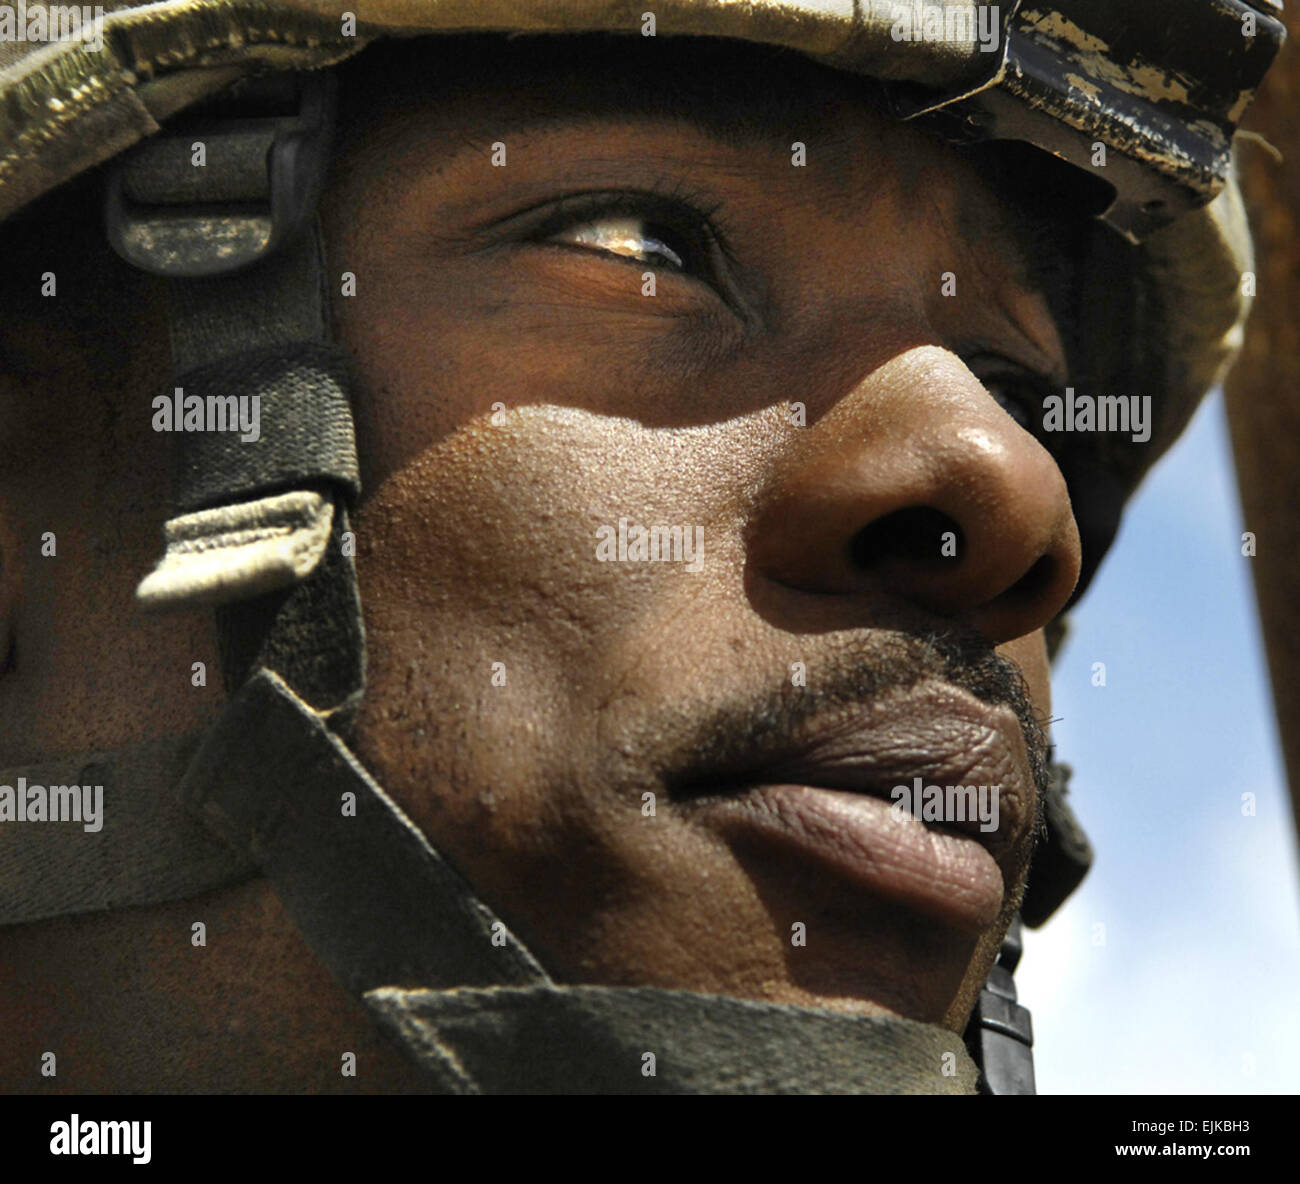 U.S. Army Sgt. Antwon Monroe searches homes for weapons and insurgents during an operation in Arab Jabbar, Iraq, March 16, 2007. Monroe is from Charlie Company, 1st Battalion, 12th Cavalry Regiment, Fort Hood, Texas.  Staff Sgt. JoAnn S. Makinano Stock Photo